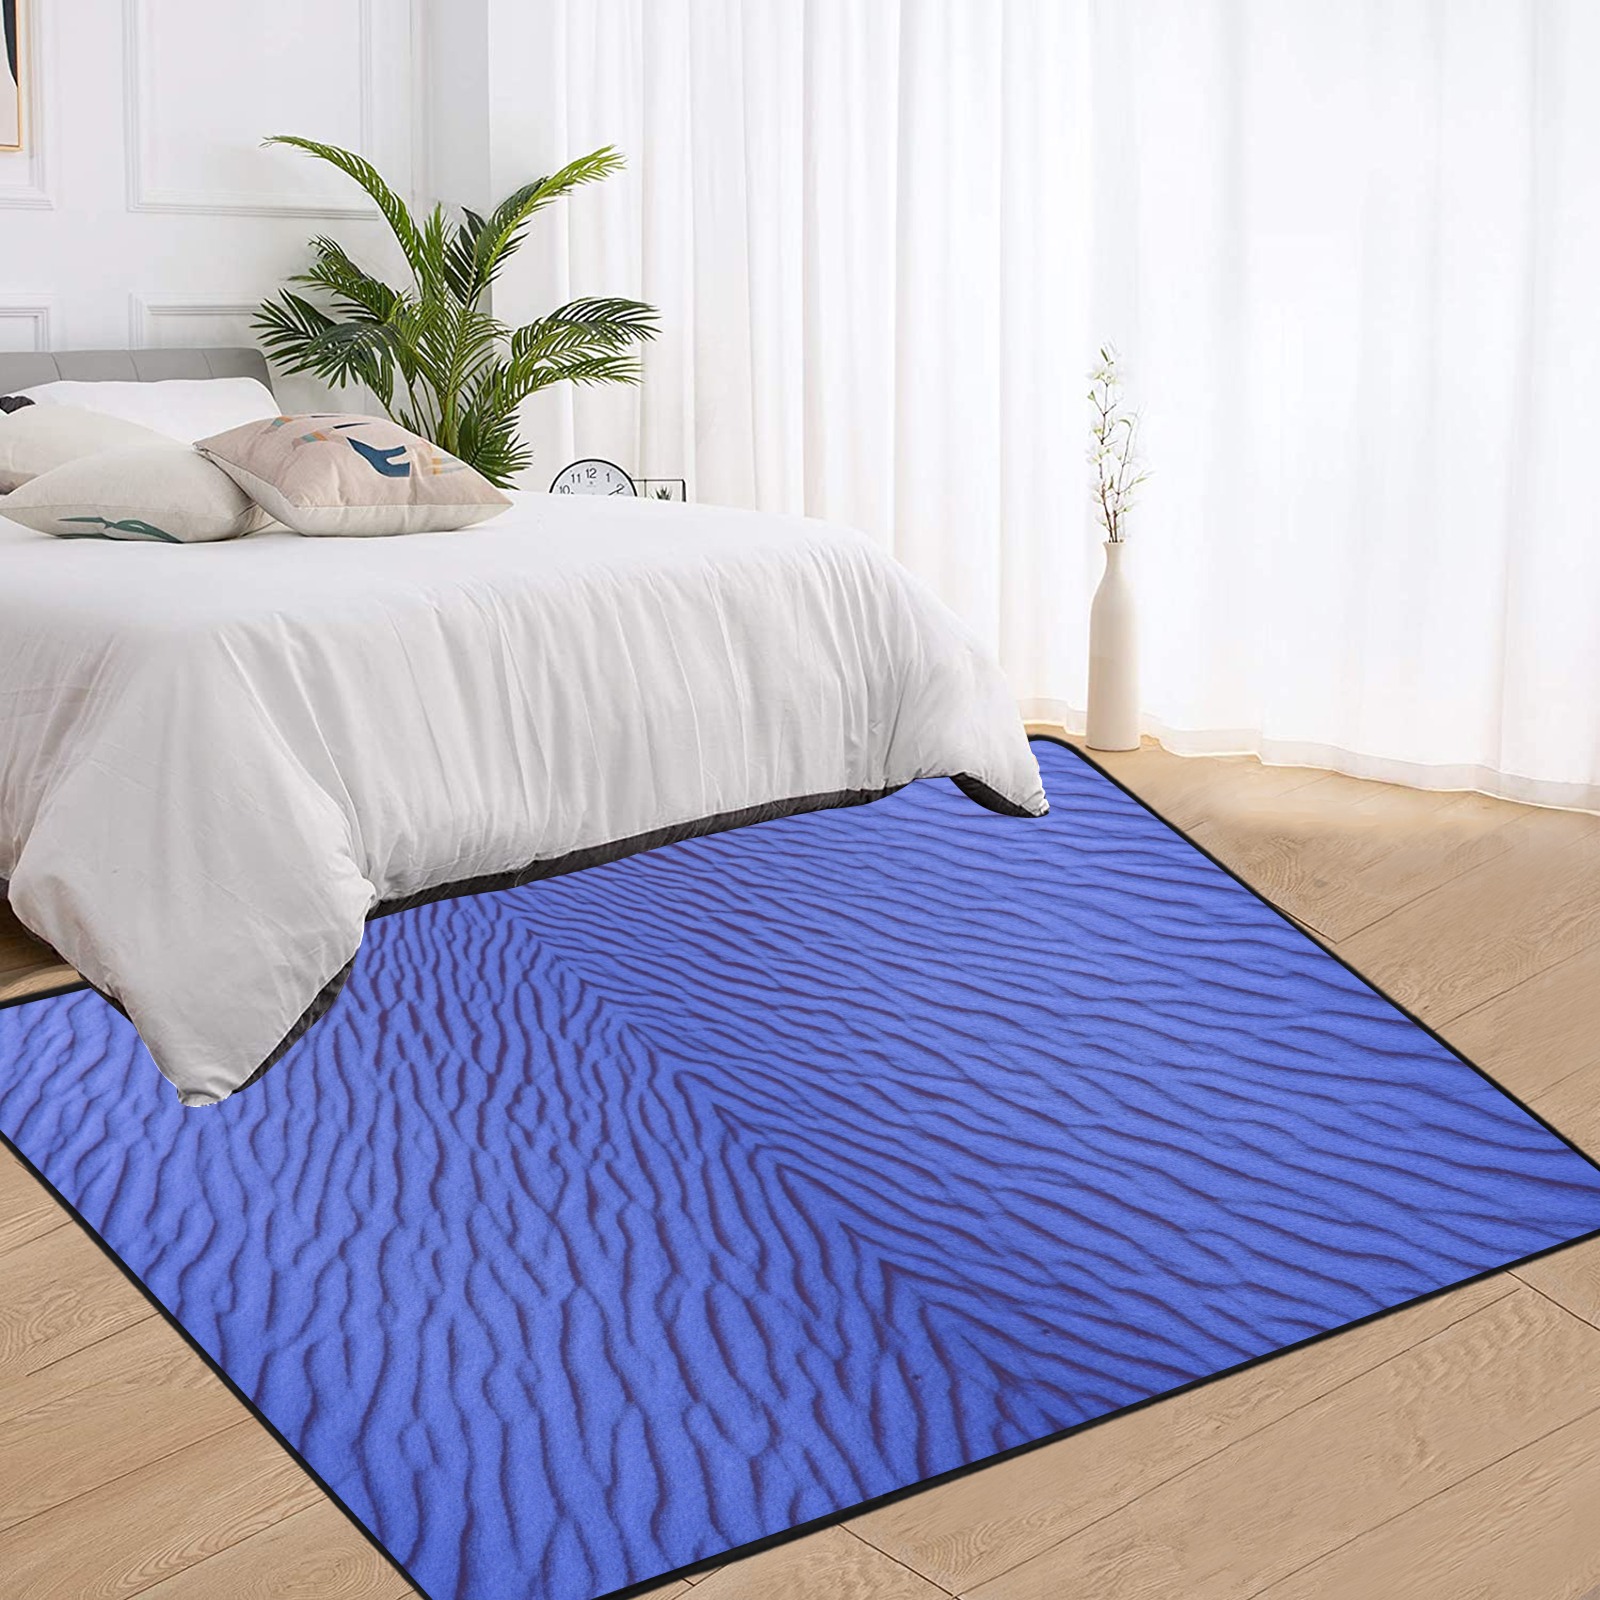 sand -blue Area Rug with Black Binding 7'x5'